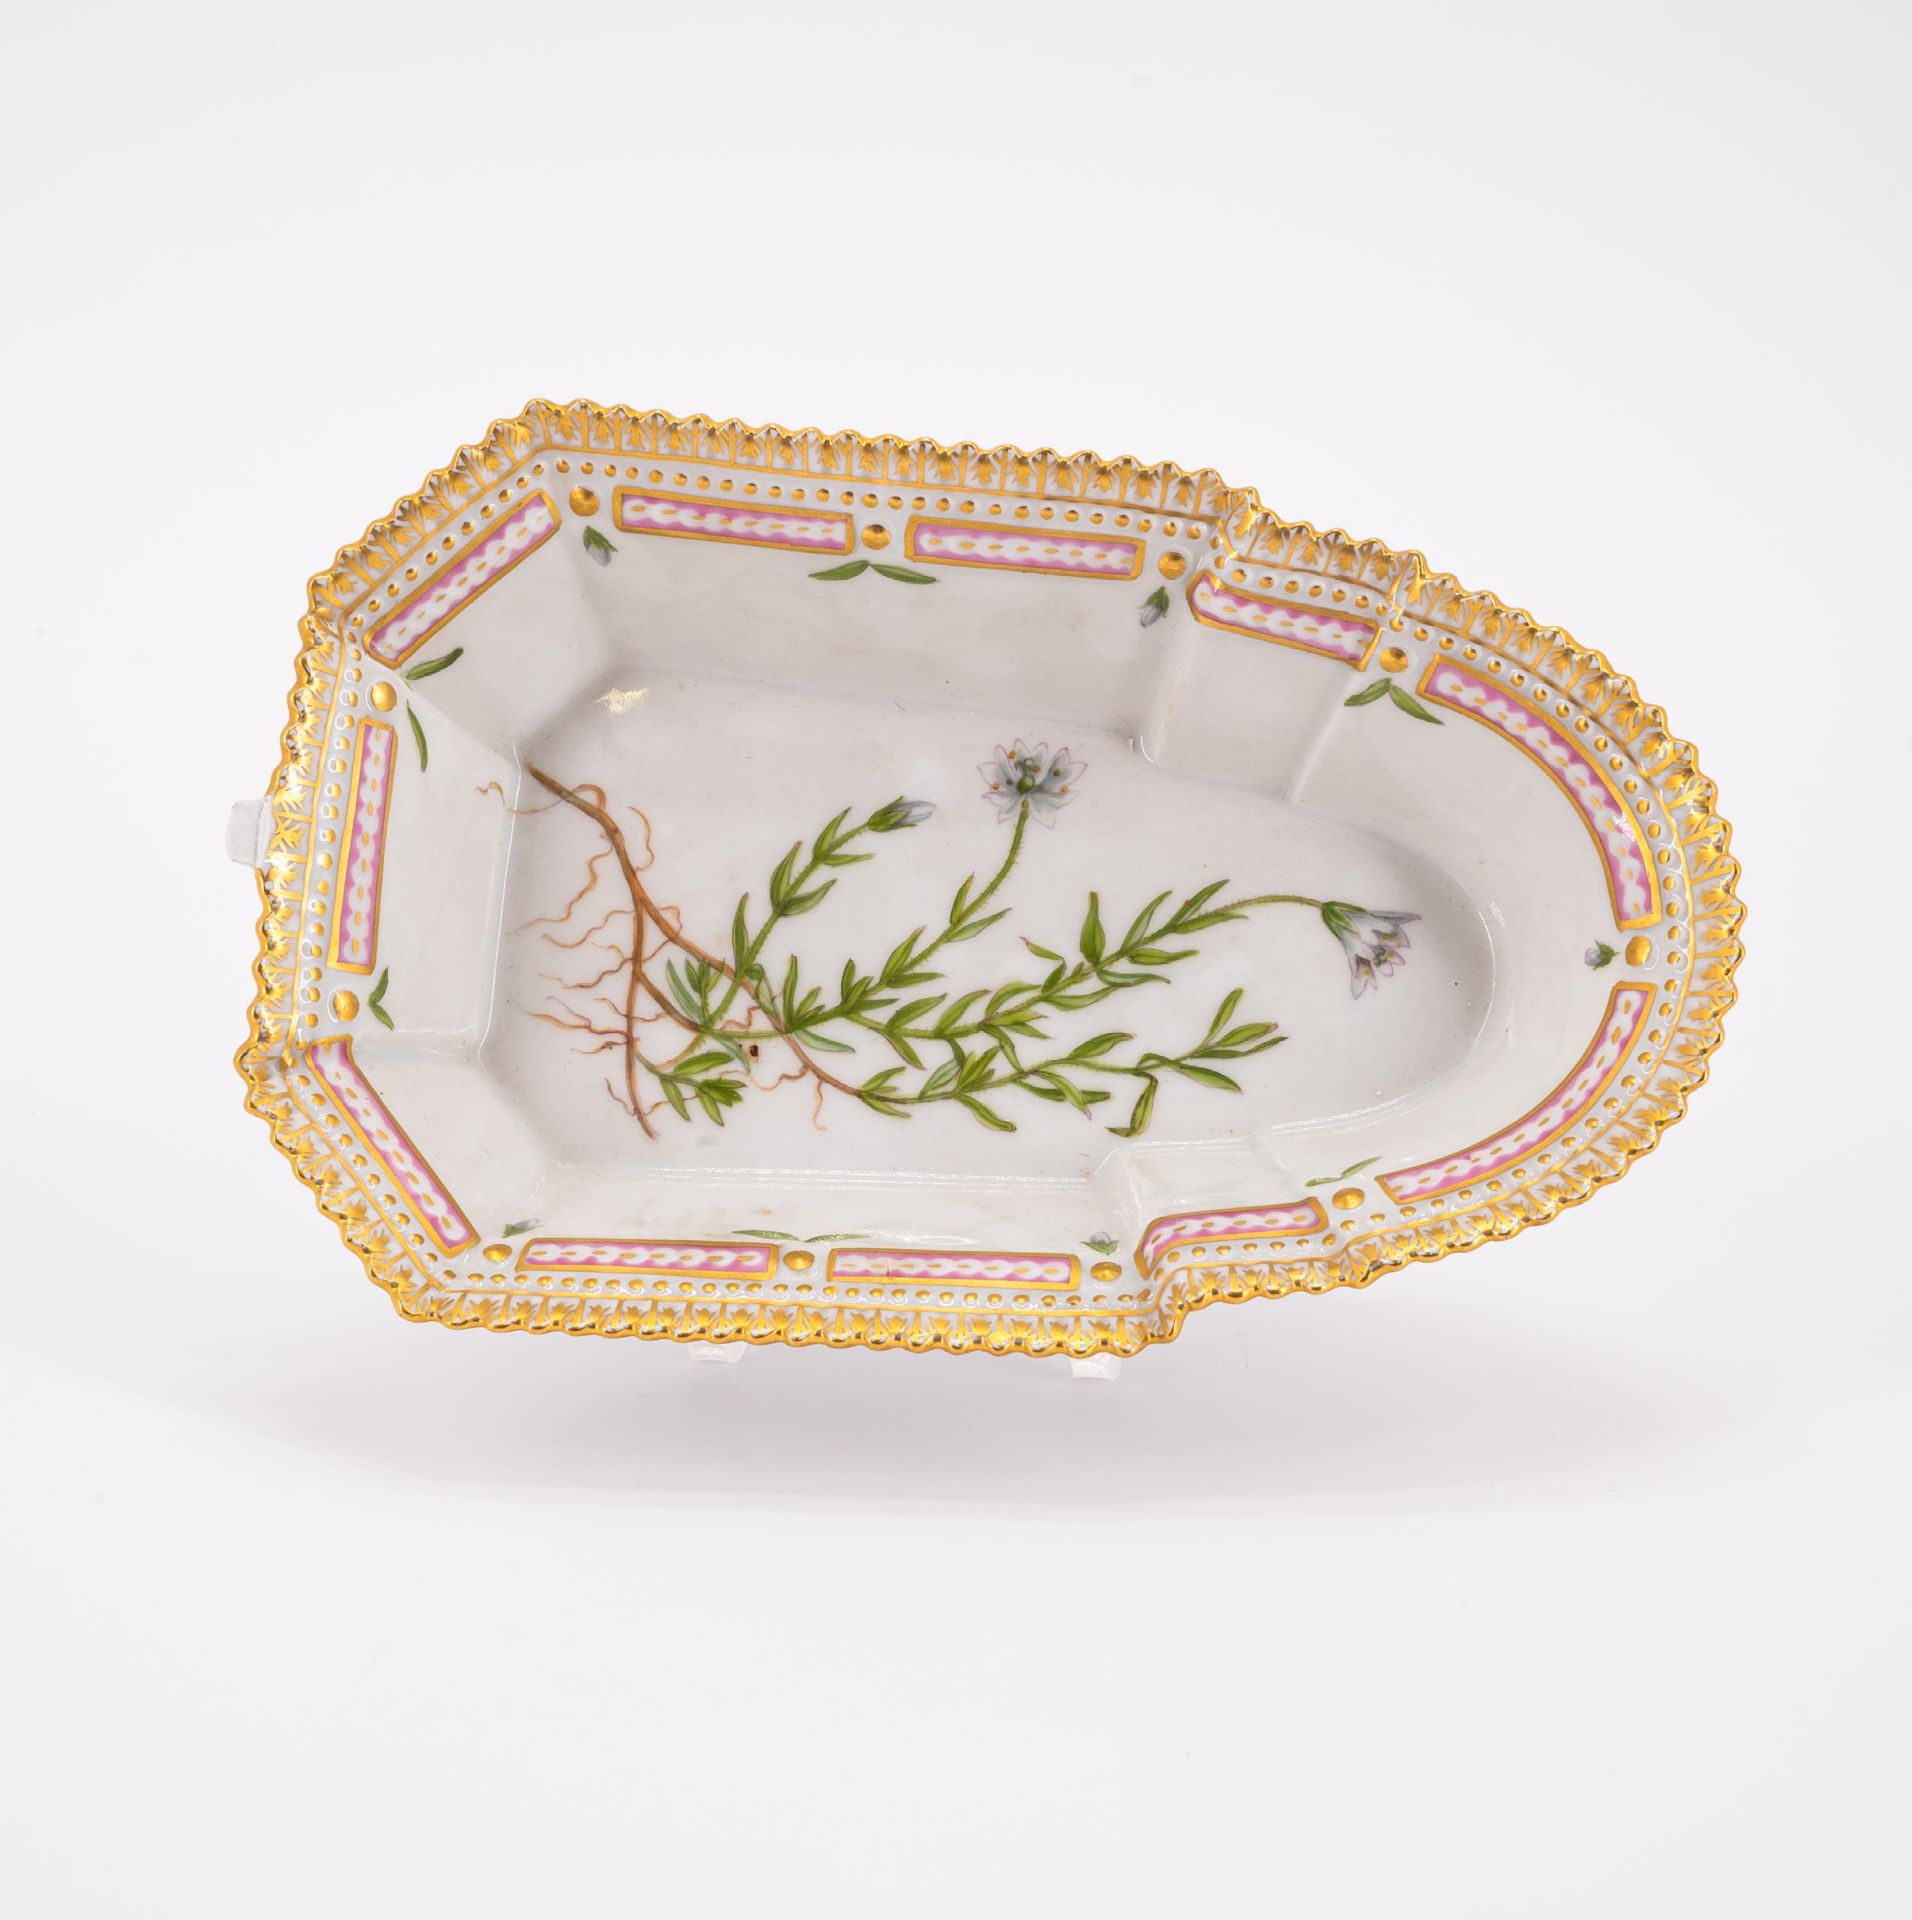 Royal Copenhagen: 95 PIECES FROM A 'FLORA DANICA' DINING SERVICE - Image 8 of 26